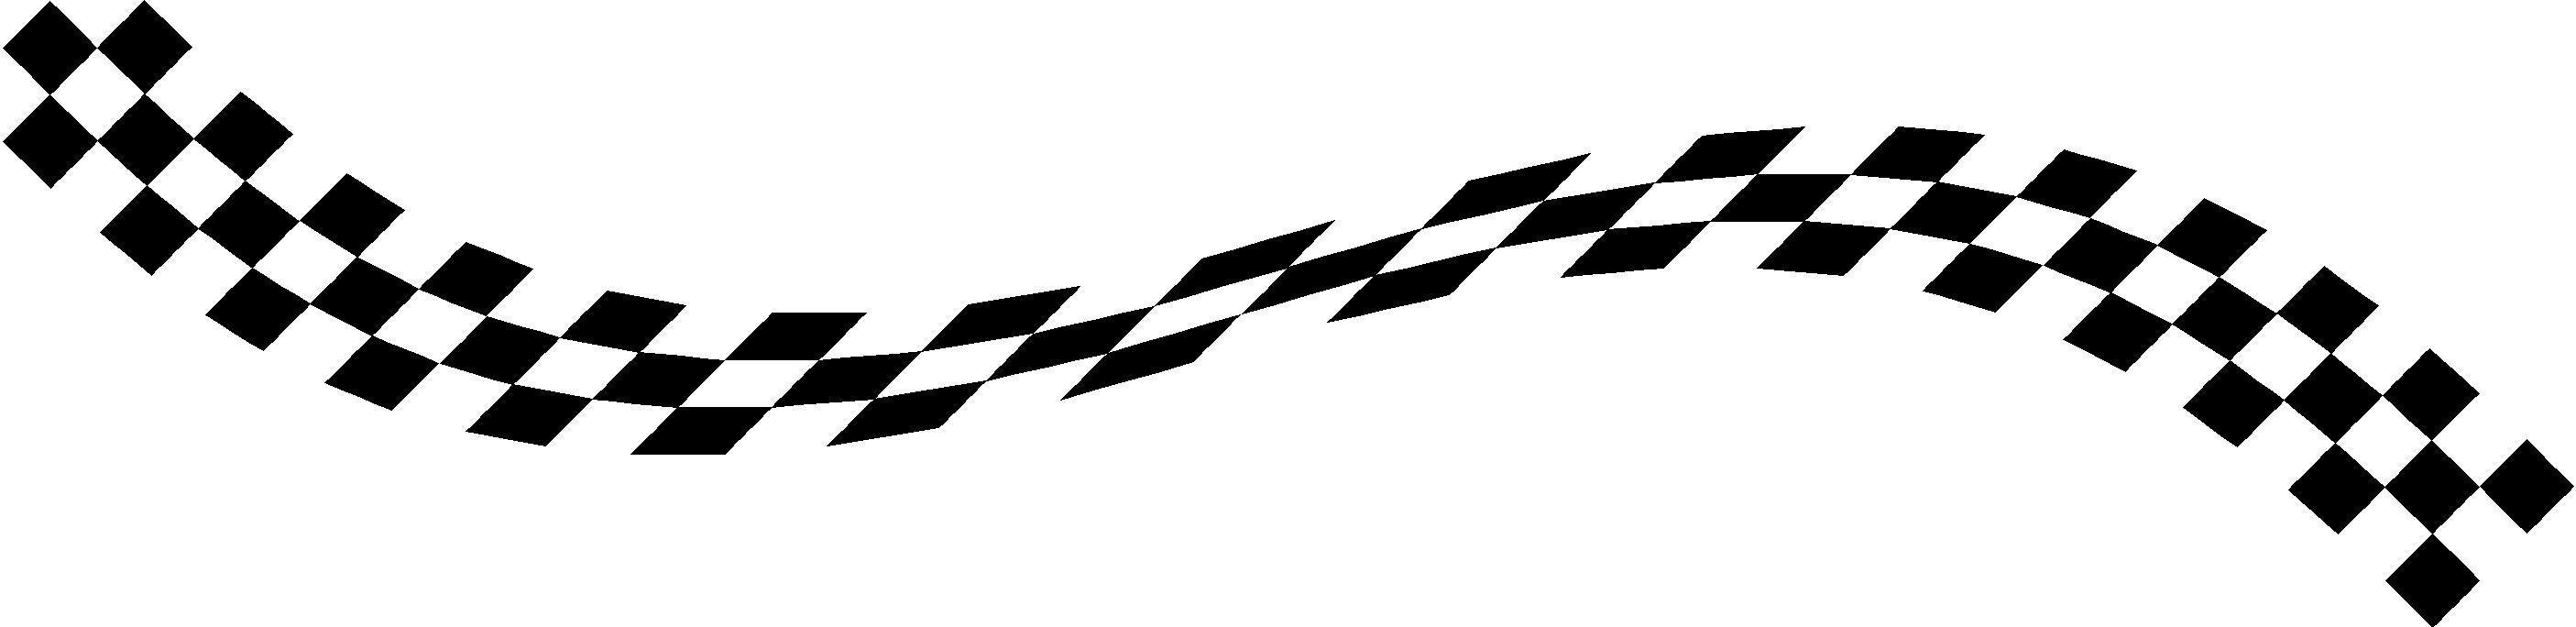 RACING FLAG | Free Download Clip Art | Free Clip Art | on Clipart ...